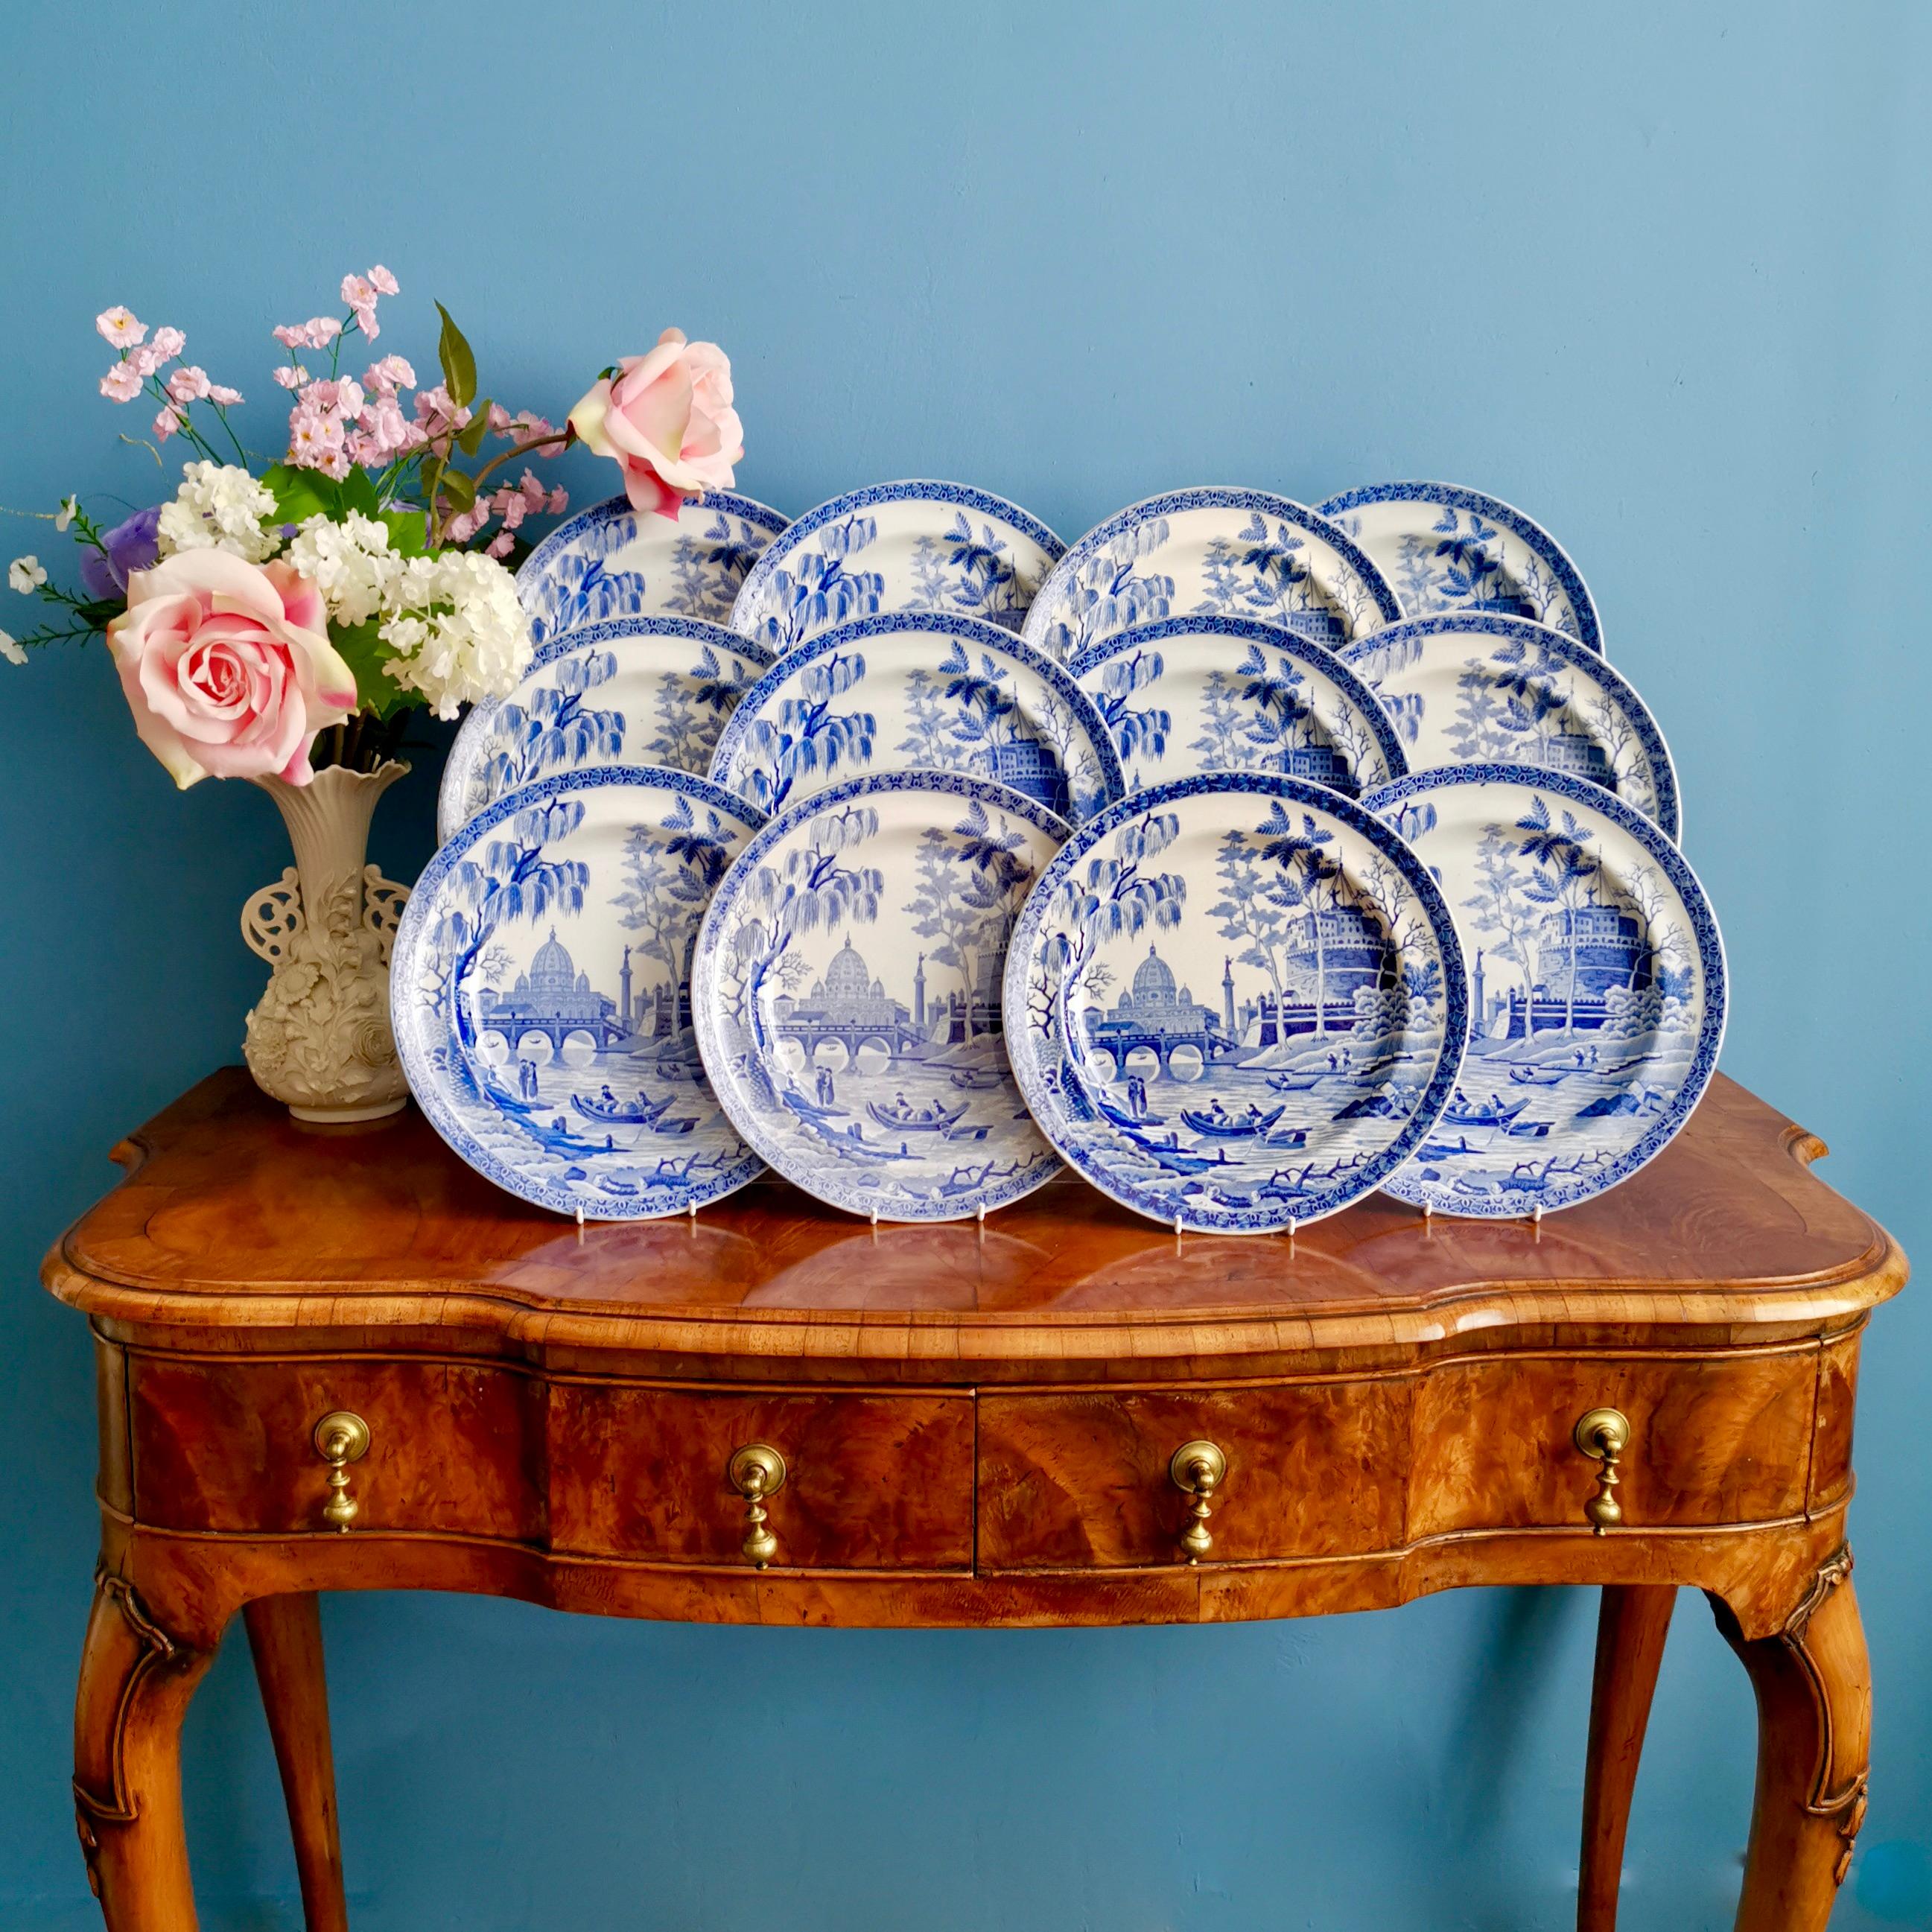 This is a spectacular set of 12 plates made by Spode between 1811 and 1833. The plates are made of pearlware and, apart from the usual crazing, in immaculate condition. They are decorated with a superbly executed blue and white 